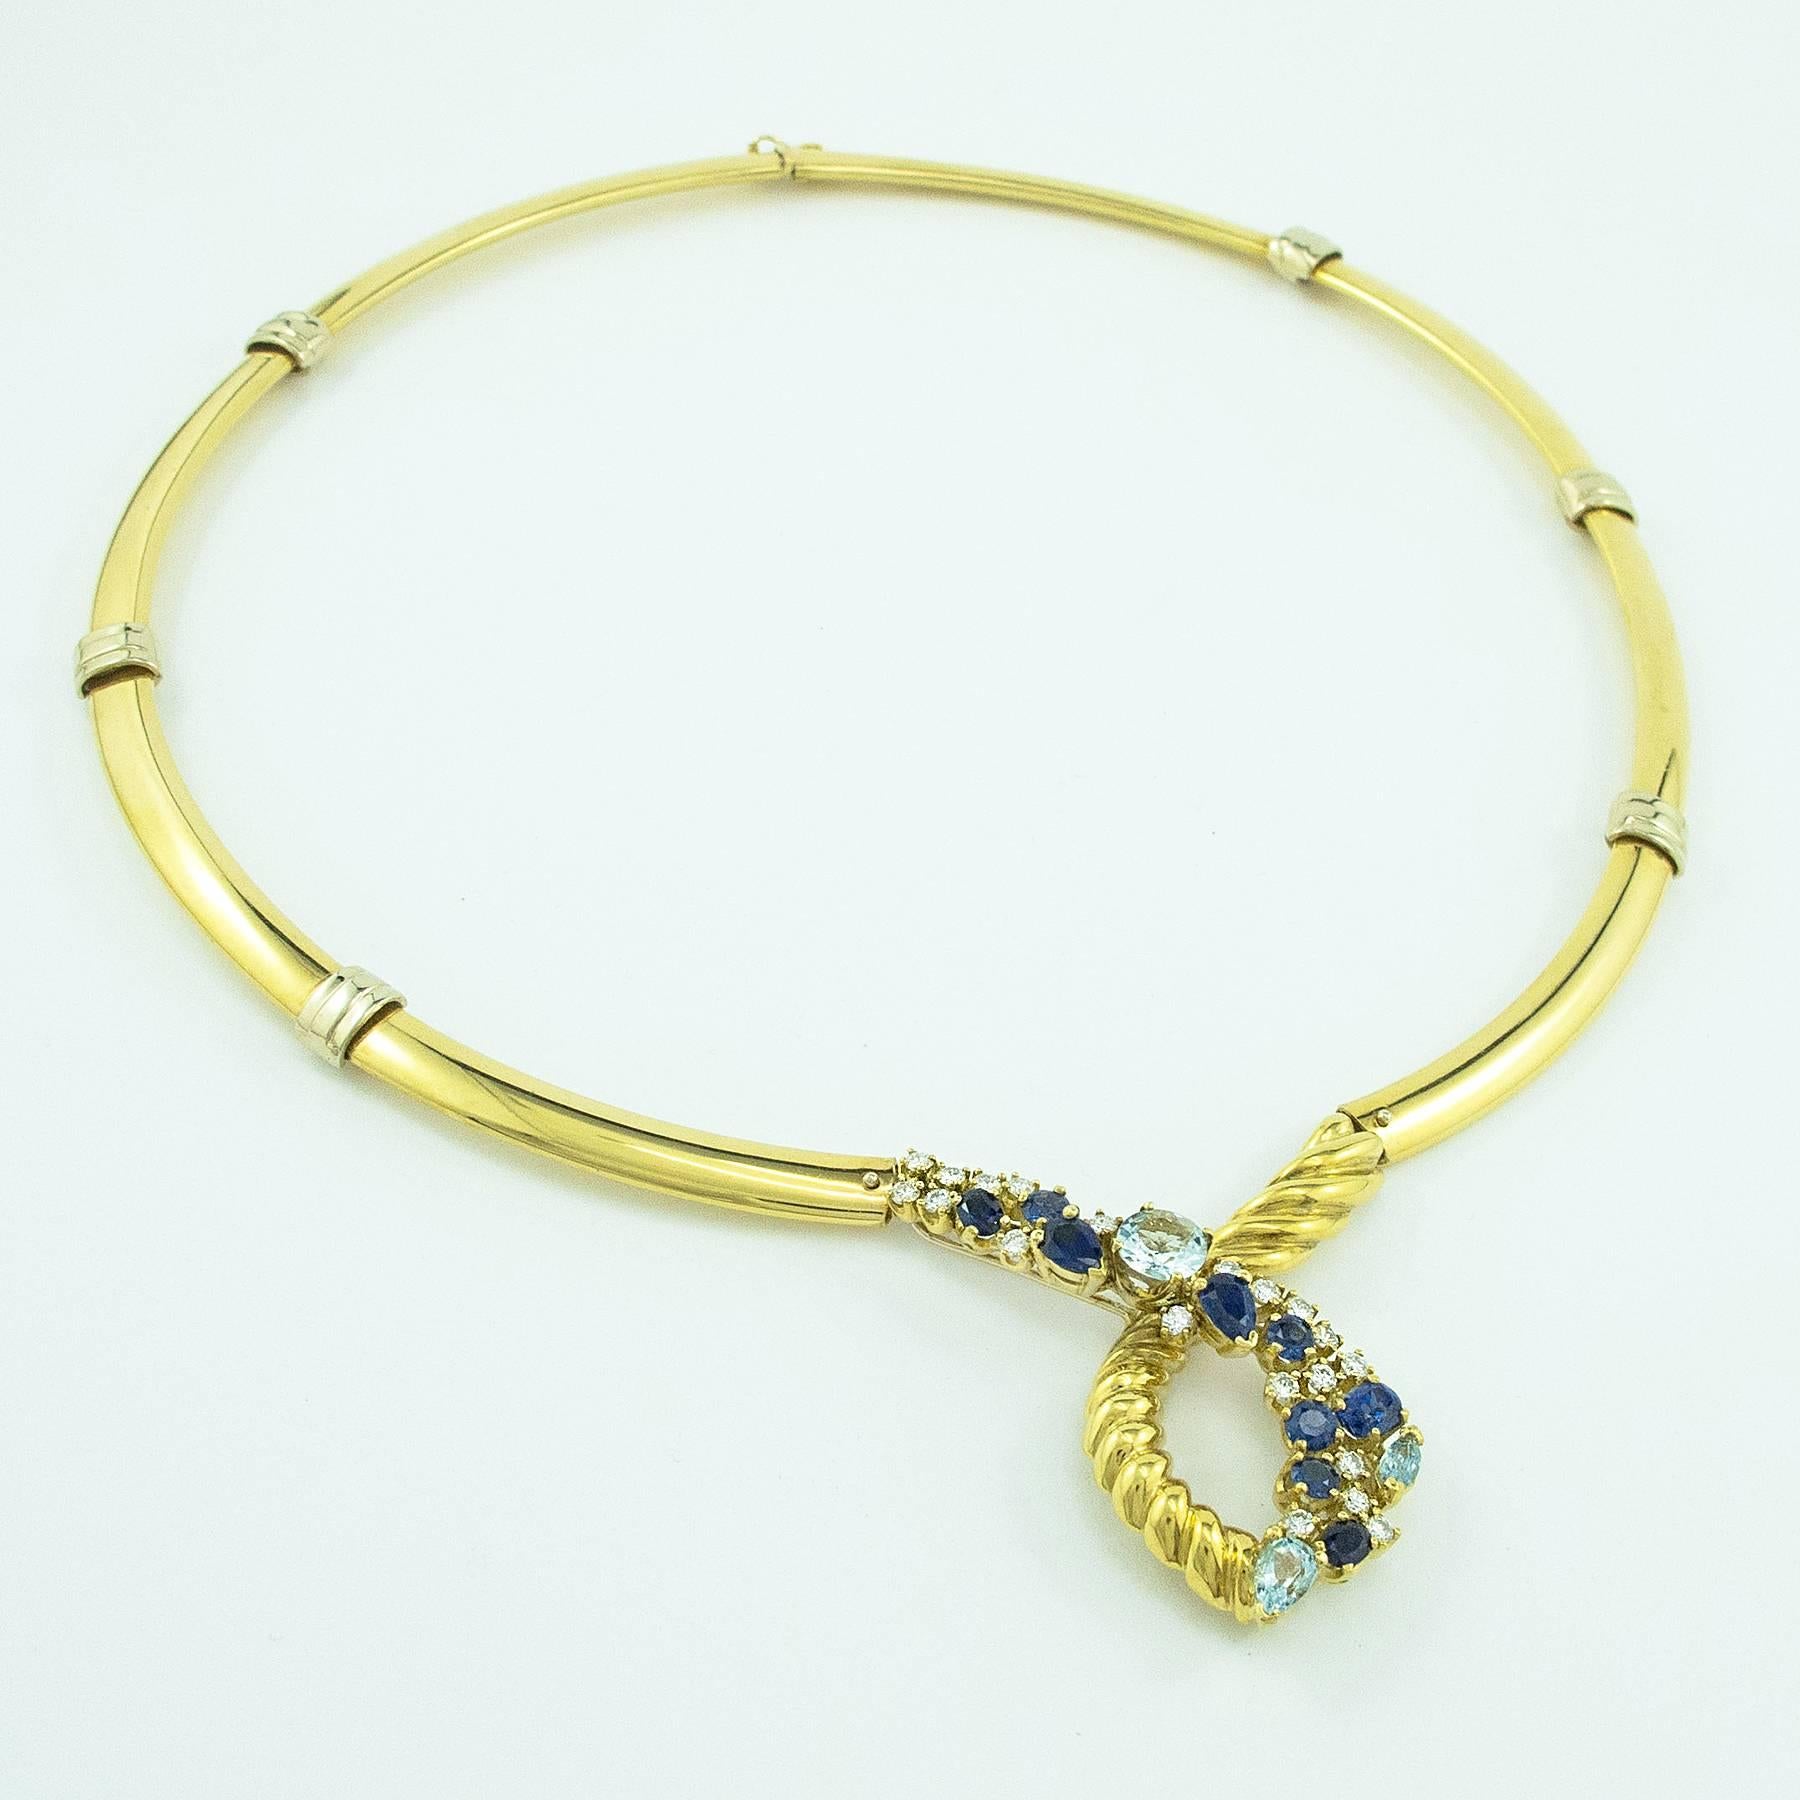 A Beni Sung Aquamarine, Diamond and Sapphire Necklace. This beautiful necklace was designed and hand crafted by the late Beni Sung in 18K yellow gold, set with natural Blue Sapphires, Diamonds and Aquamarines.

The piece is comprised of 8 fitted and